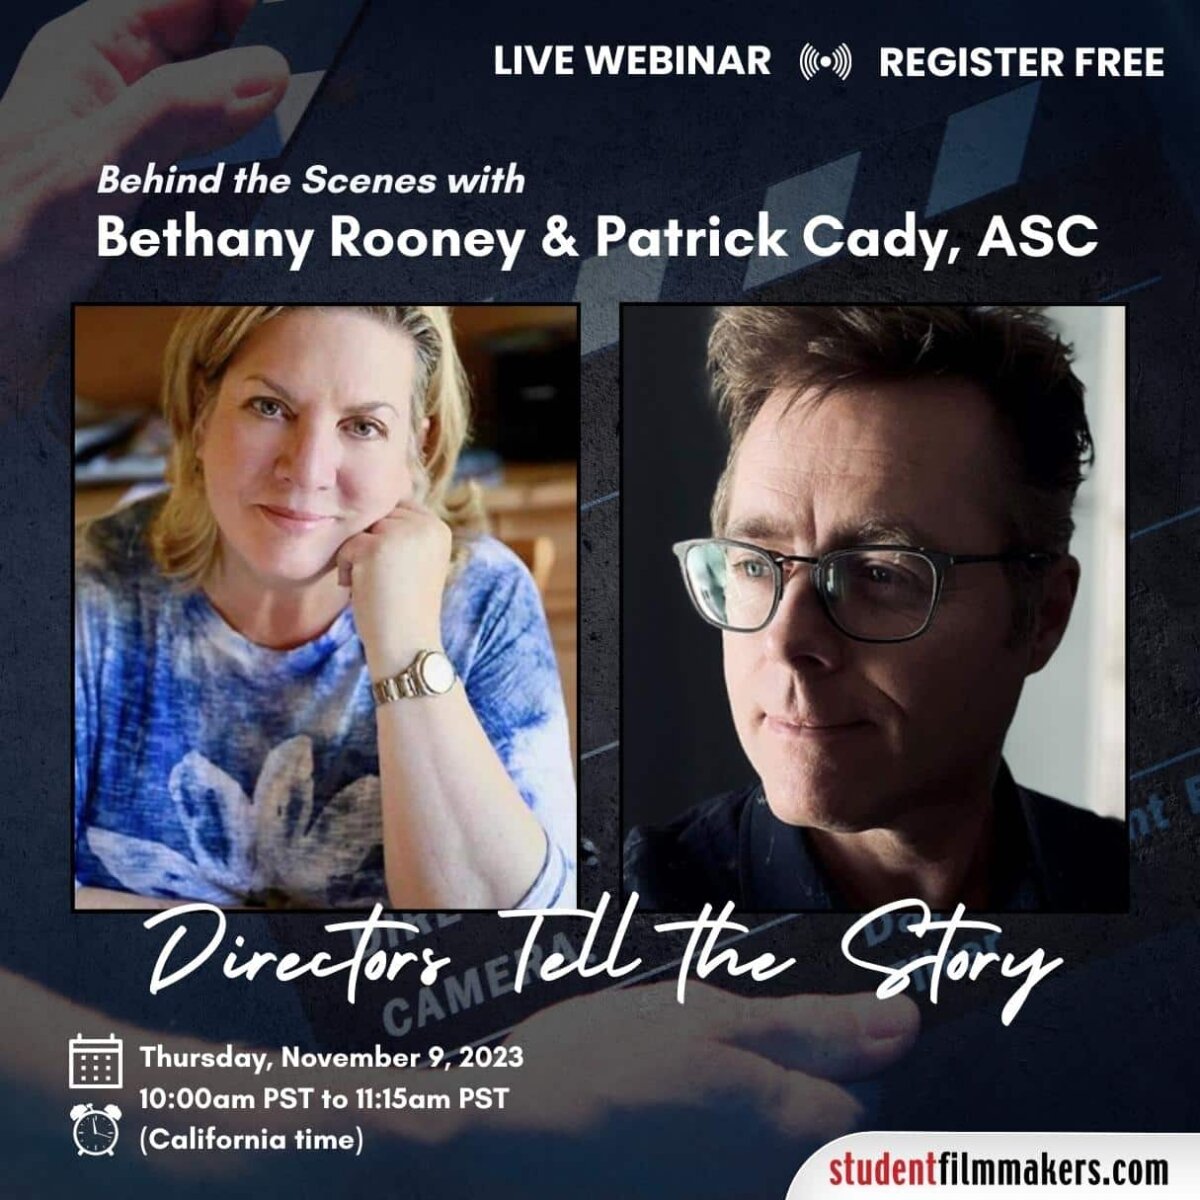 Behind the Scenes with Bethany Rooney and Patrick Cady, ASC: "Directors Tell the Story"